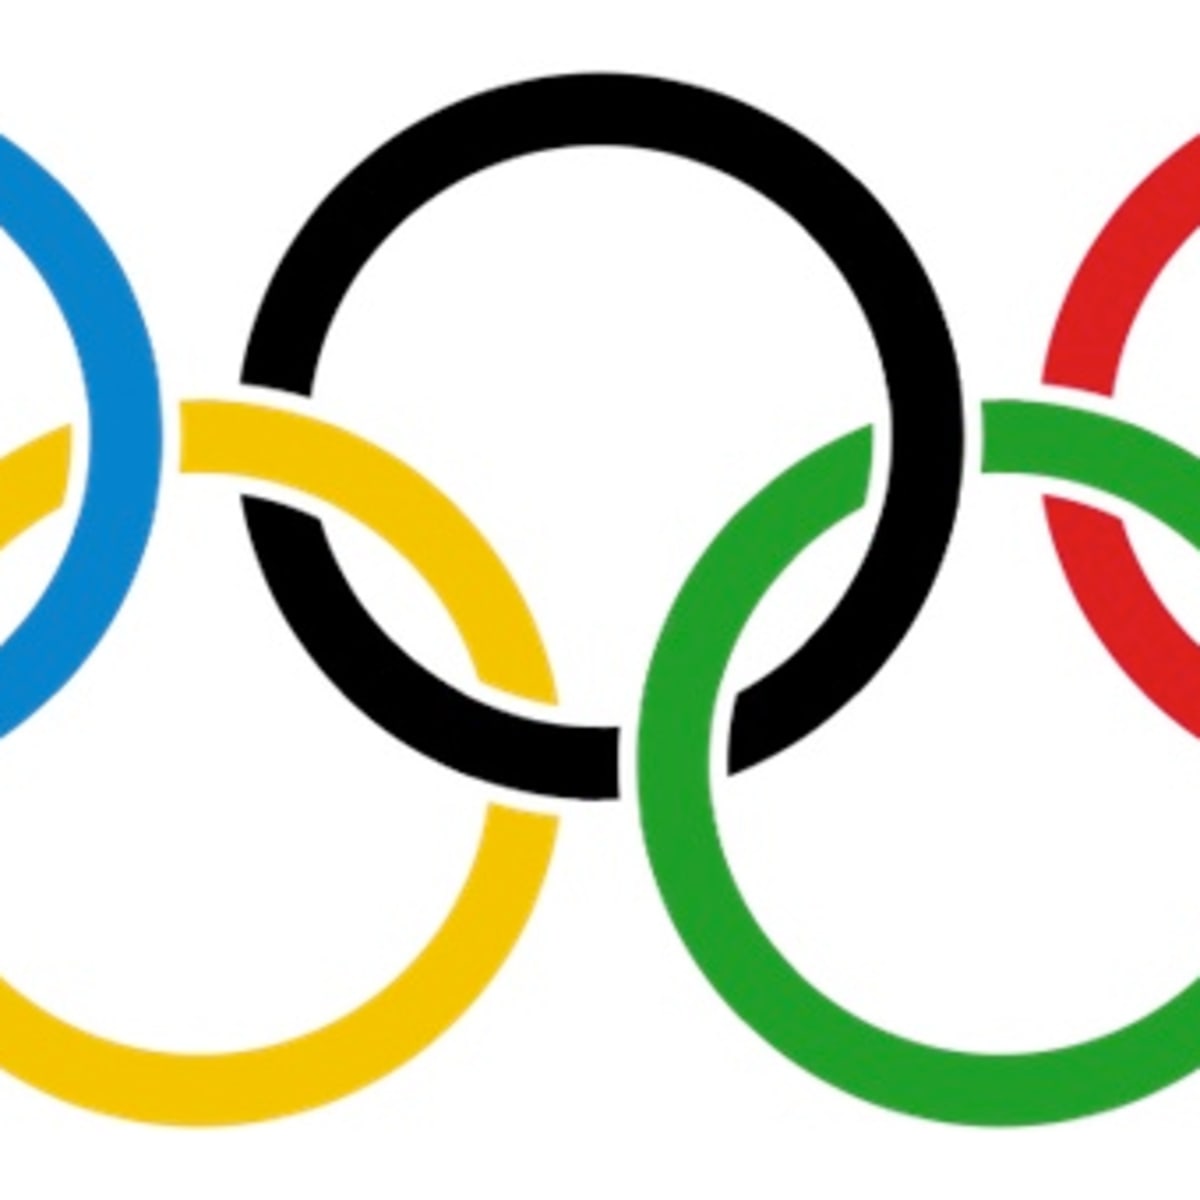 The Olympic Rituals and Symbols | CIPC